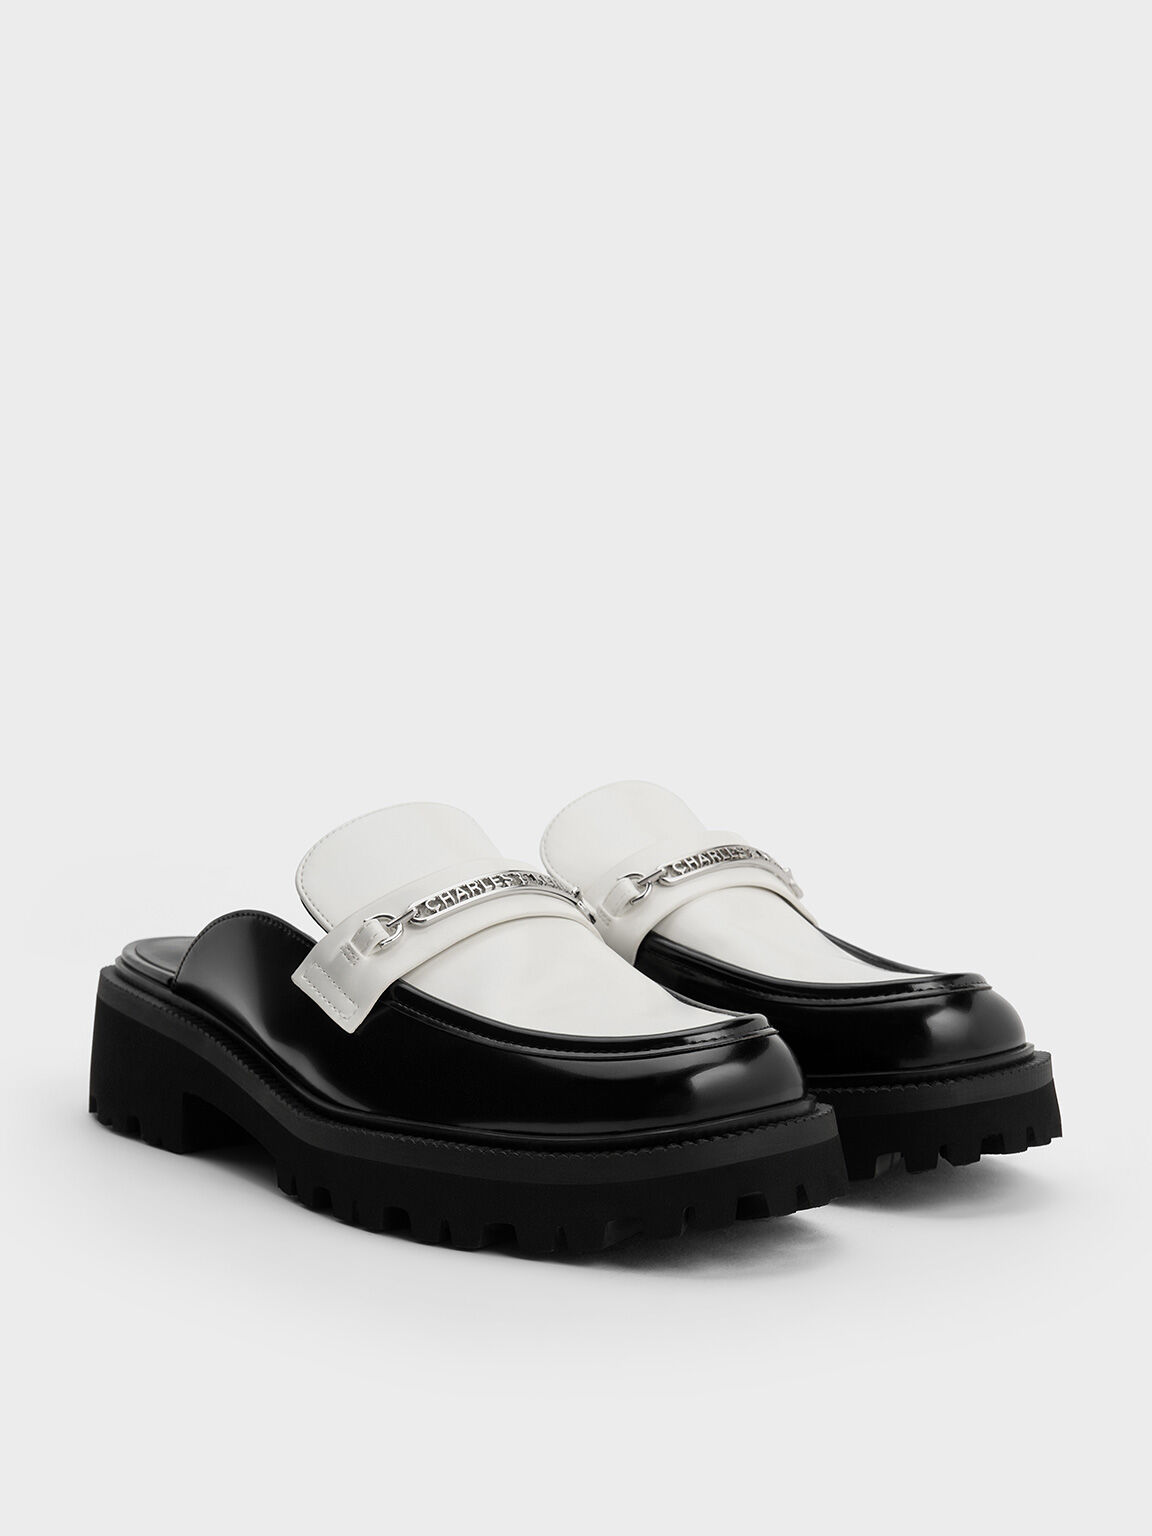 Remy Two-Tone Metallic-Accent Loafer Mules, Multi, hi-res